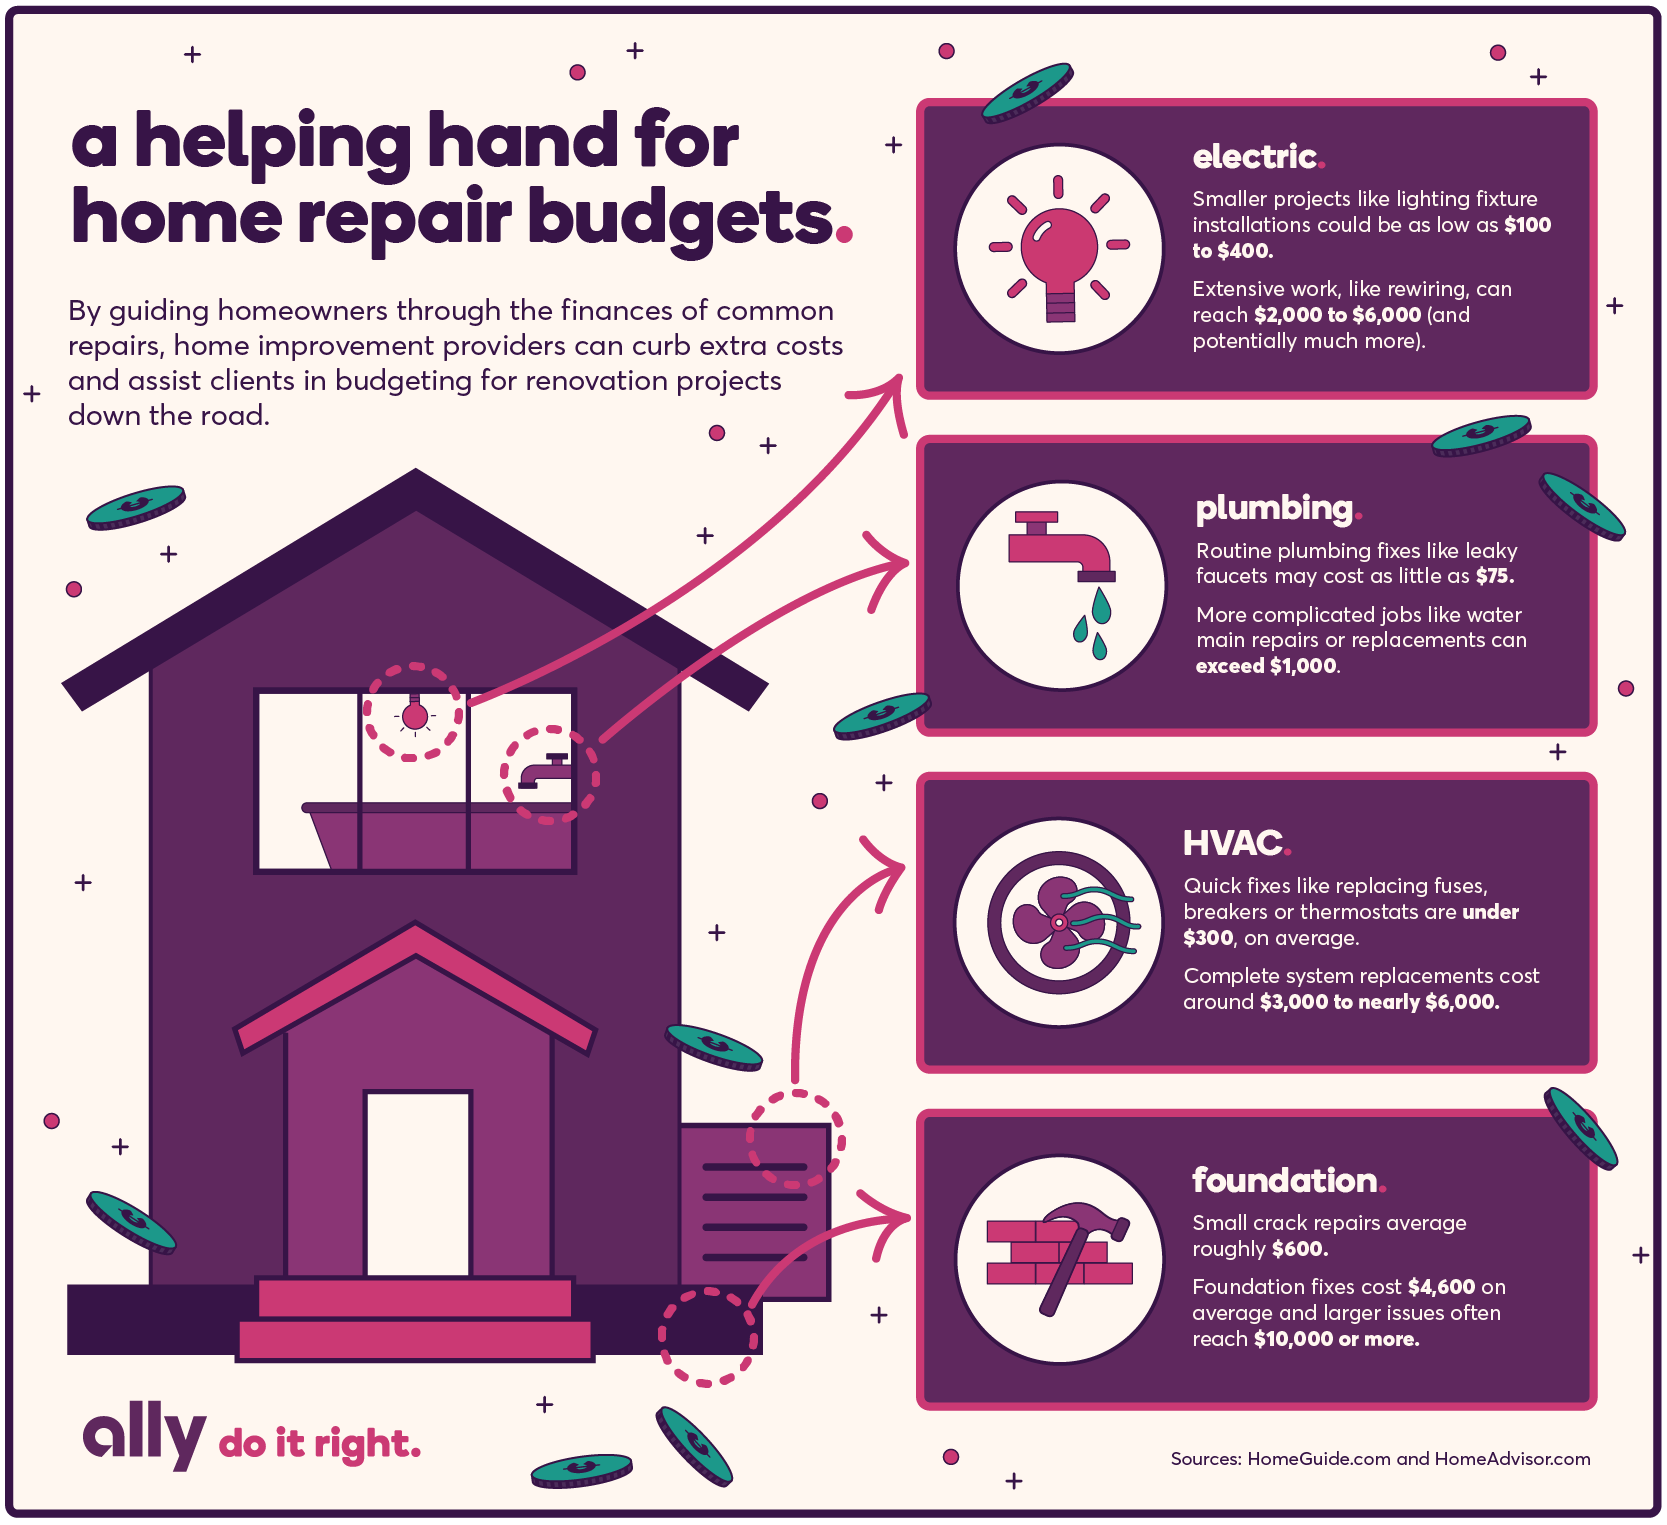 A helping hand for home repair budgets. By guiding homeowners through the finances of common repairs, home Improvement providers can curb extra costs and assist clients in budgeting for renovation projects down the road. Electric repairs: Smaller projects like lighting fixture installations could be as low as $100 to $400. Extensive work, like rewiring, can reach $2,000 to $6,000 (and potentially much more). Plumbing repairs: Routine plumbing fixes like leaky faucets may cost as little as $75. More complicated jobs like water main repairs or replacements can exceed $1,000. HVAC repairs: Quick fixes like replacing fuses, breakers or thermostats are under $300, on average. Complete system replacements cost around $3,000 to nearly $6,000. Foundation repairs: Small crack repairs average roughly $600. Foundation fixes cost $4,600 on average and larger Issues often reach $10,000 or more. Sources: homeguide.com and homeadvisor.com.